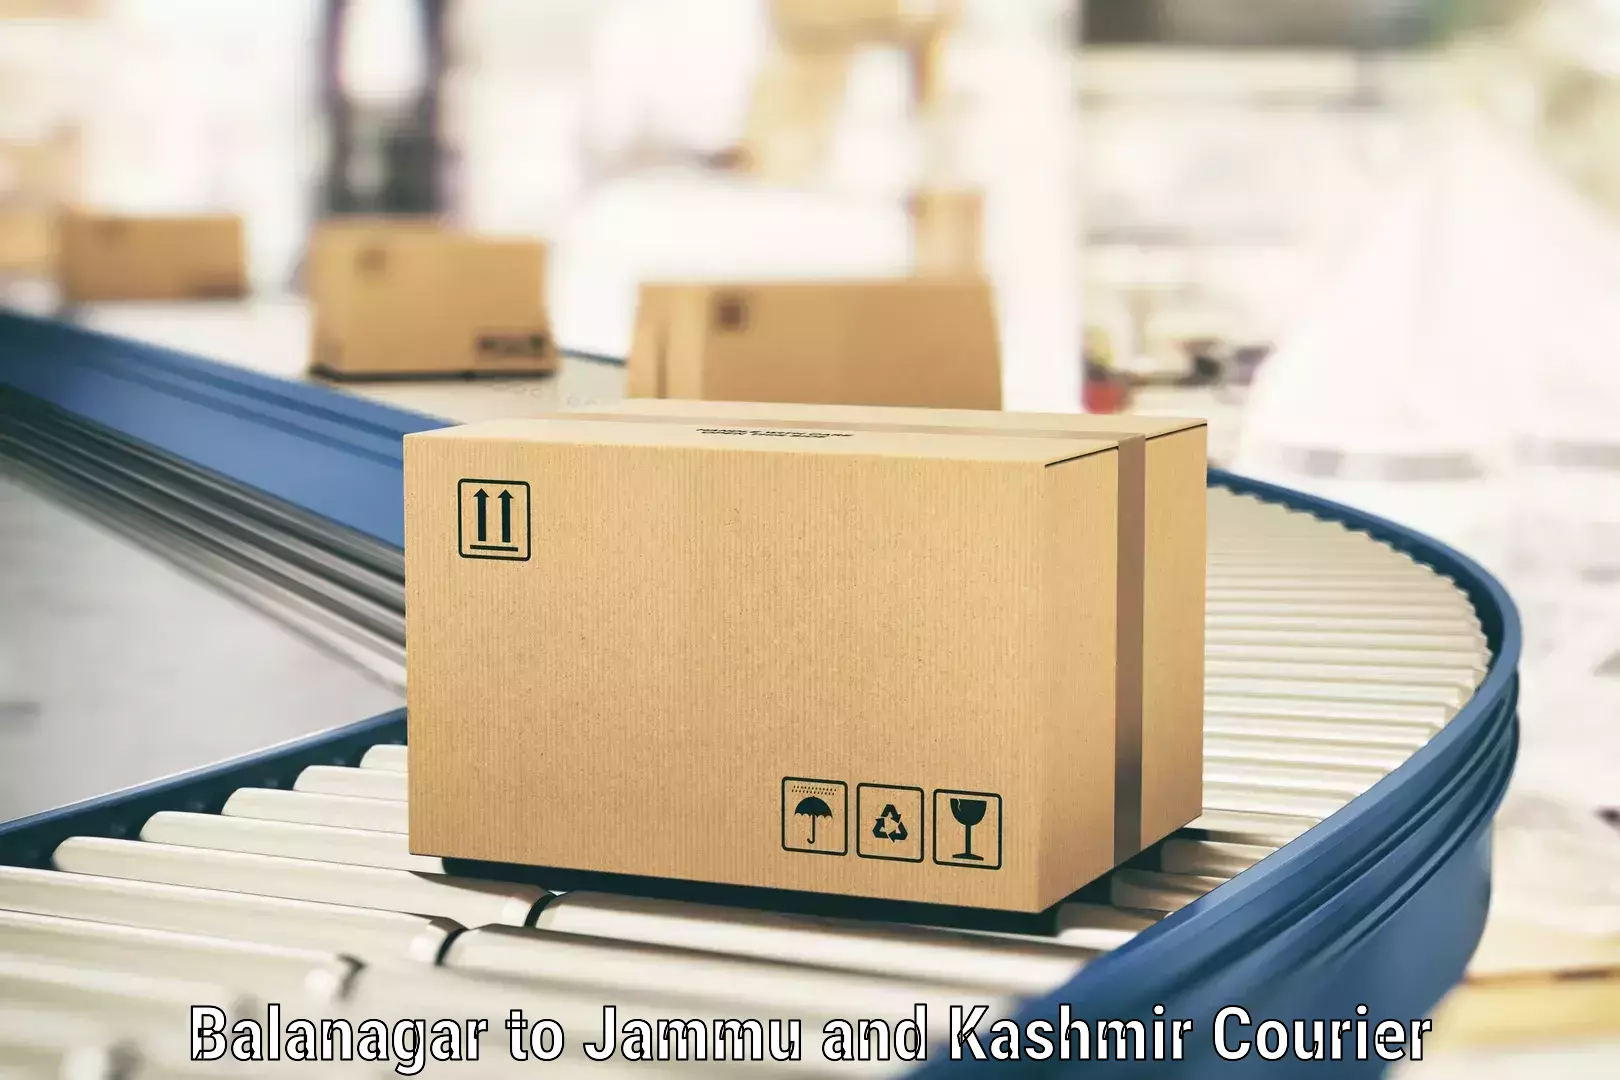 Large package courier Balanagar to Budgam